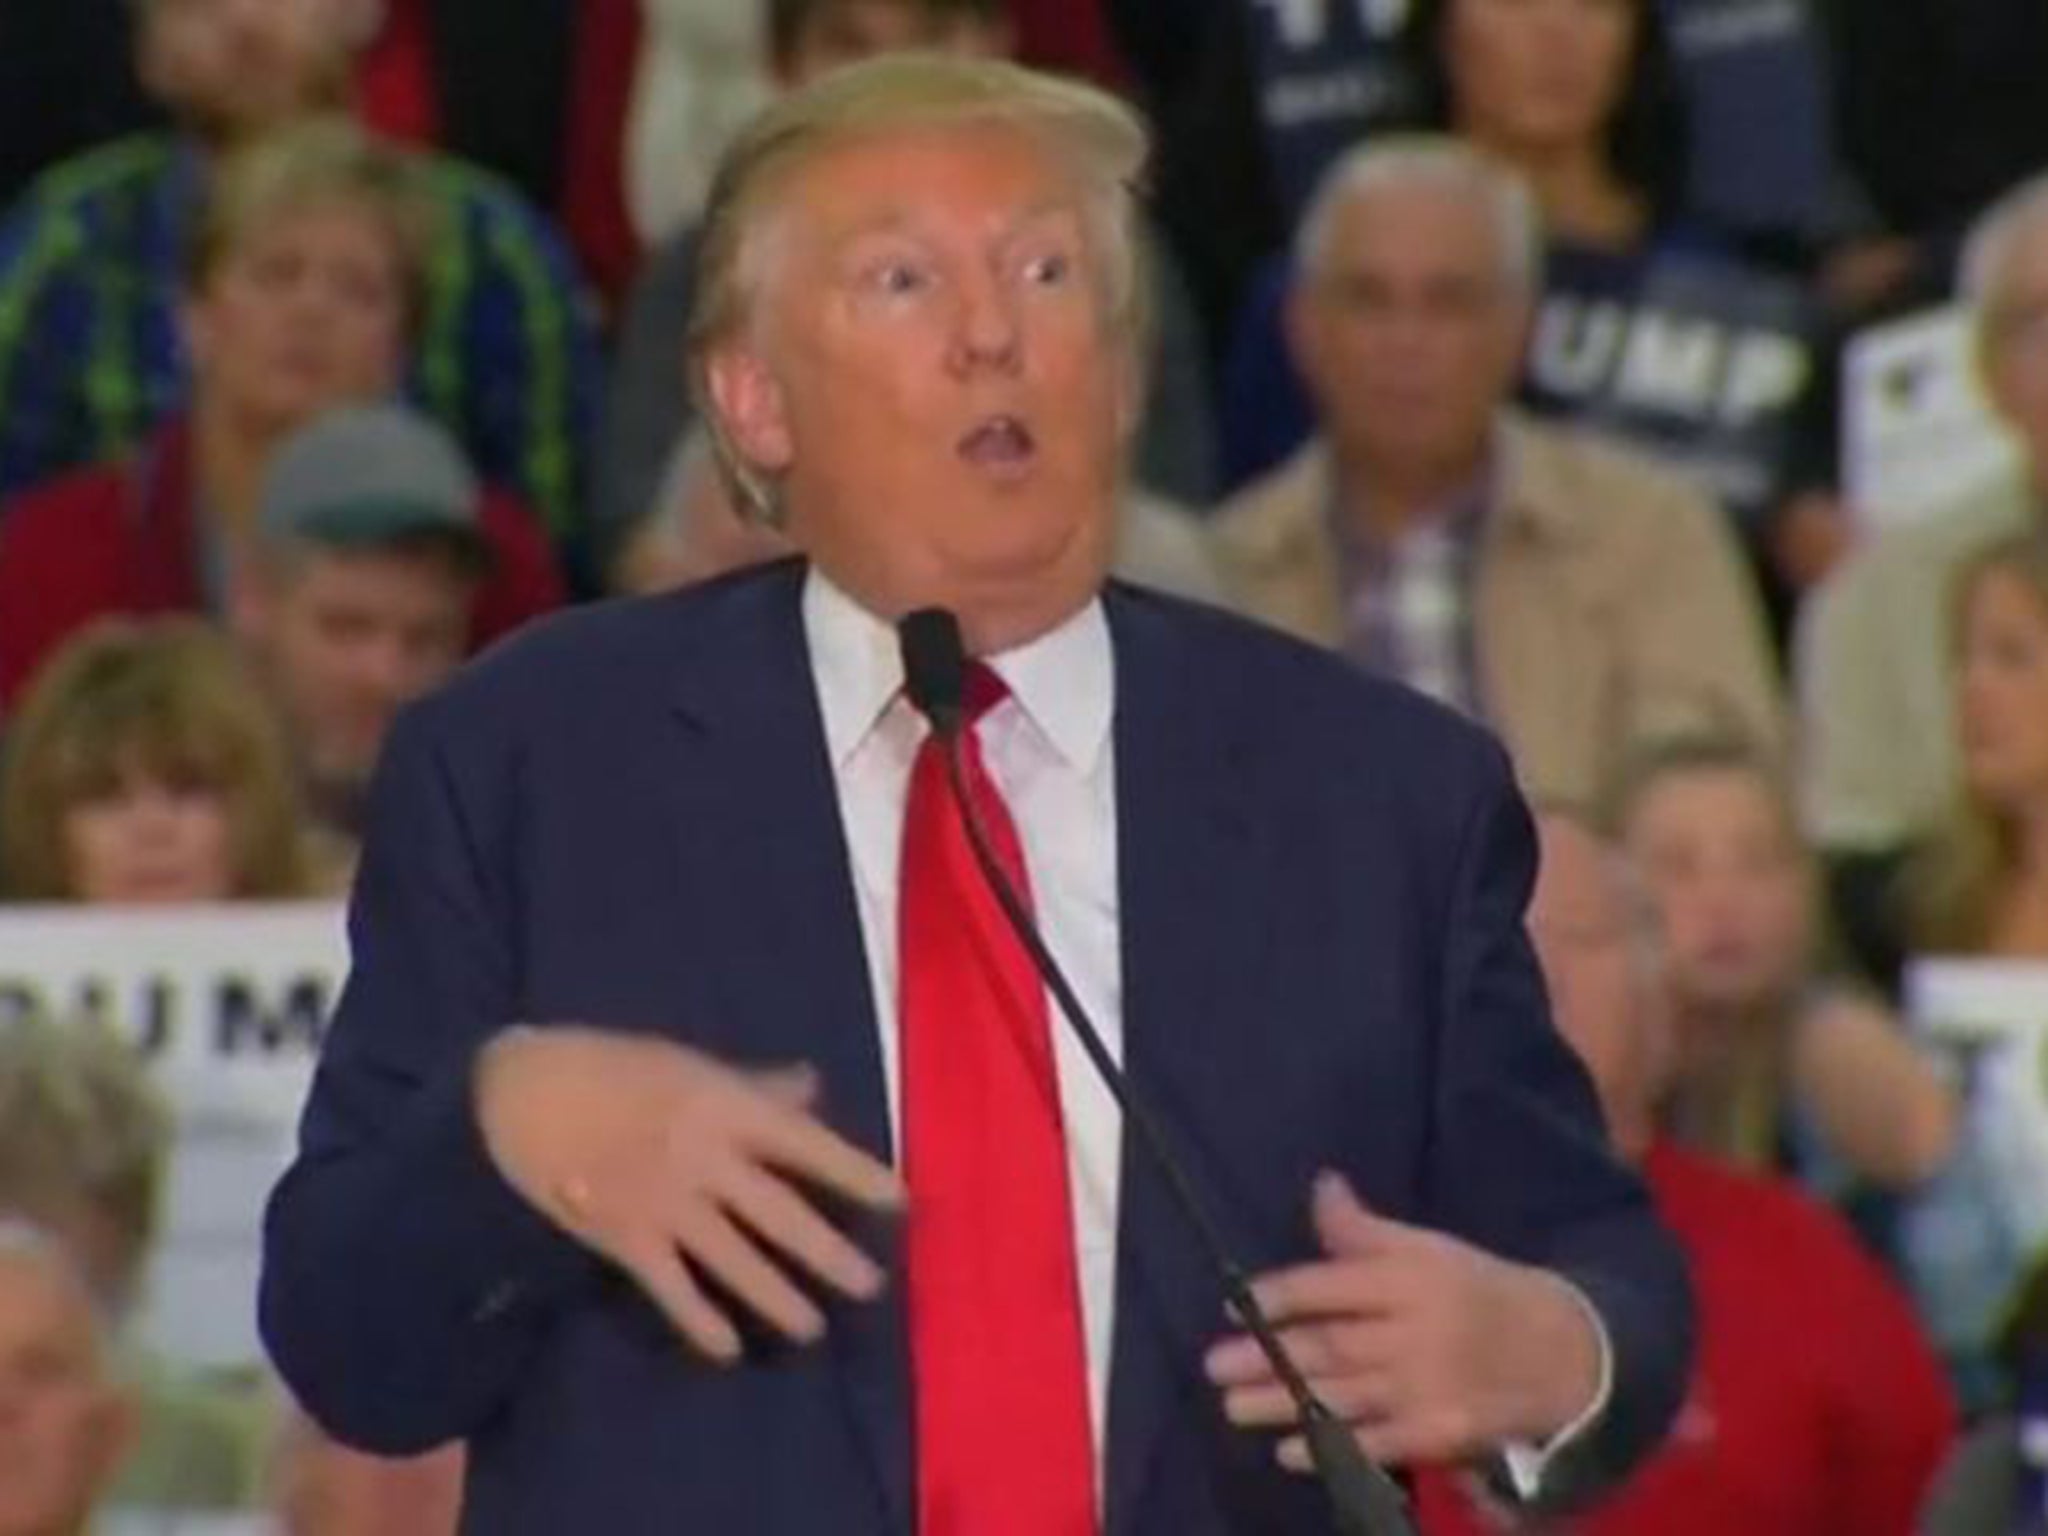 Republican presidential contender Donald Trump mocks the movements of a disabled New York Times reporter